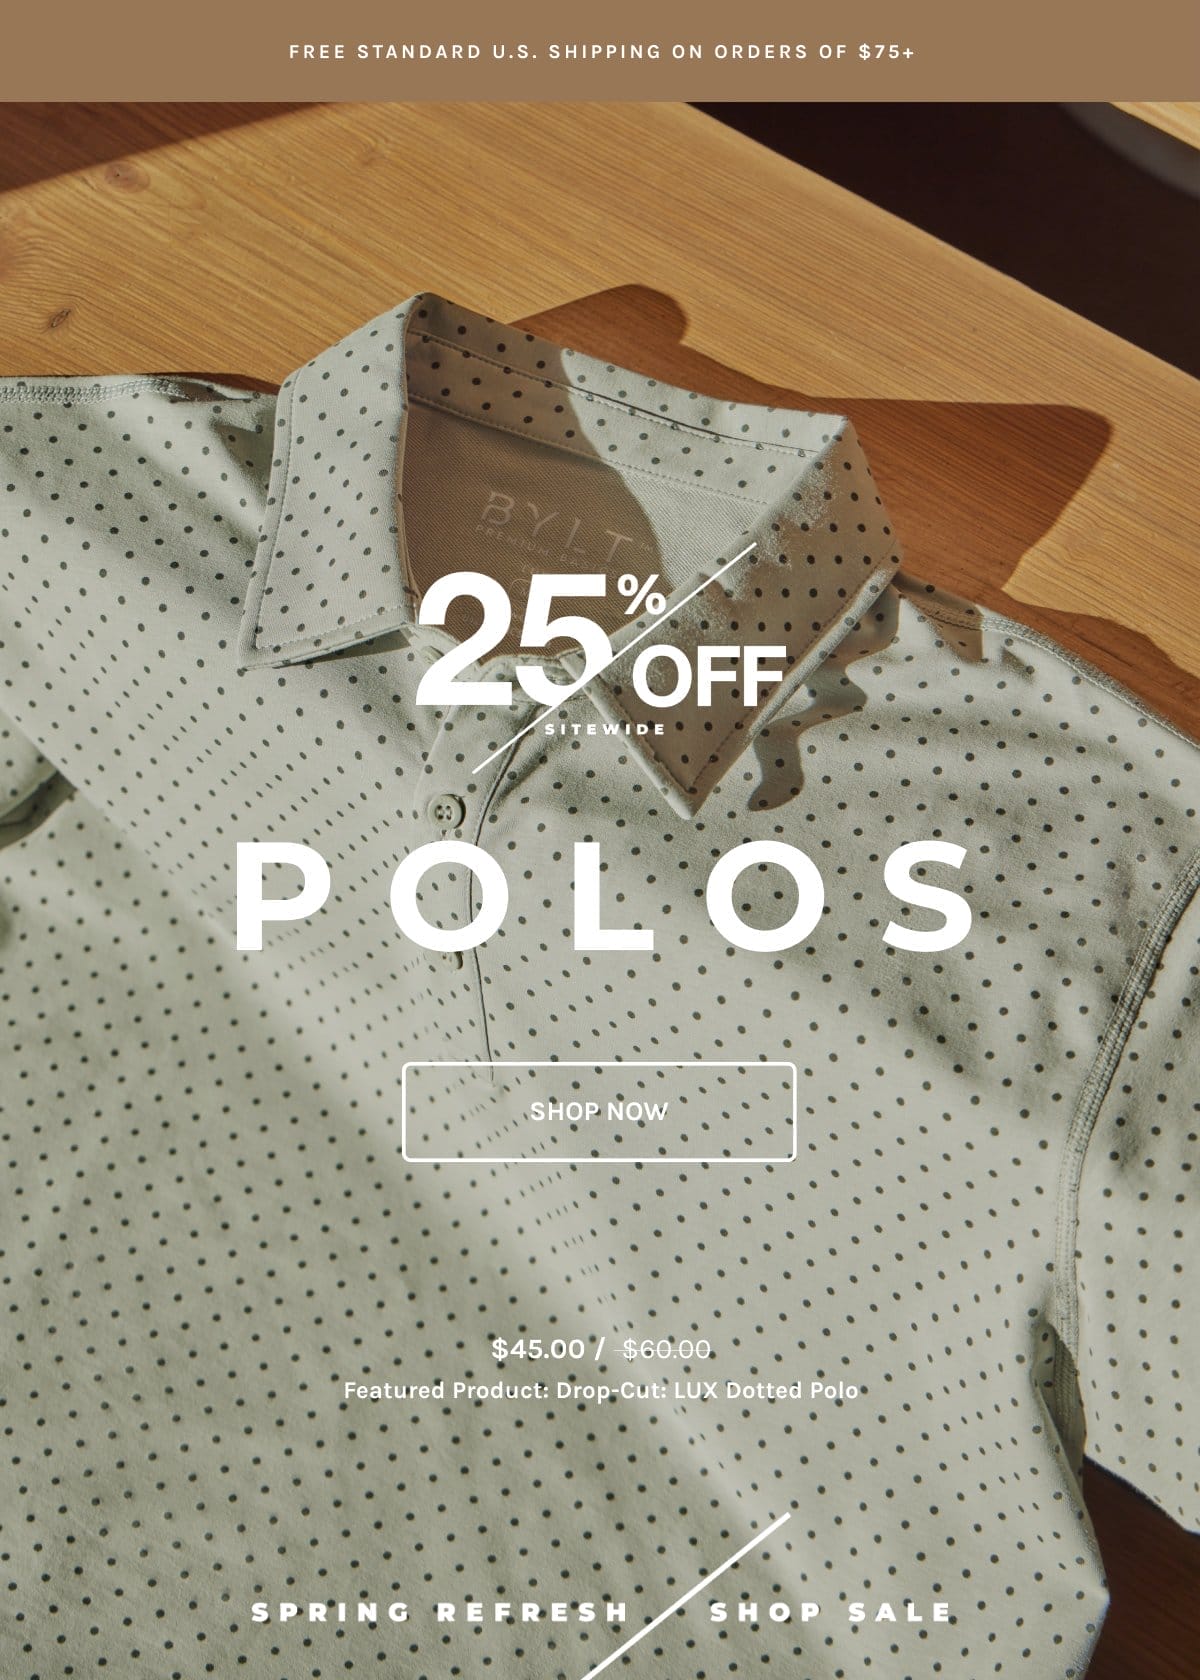 Spring Refresh Sale - 25% OFF - Polos